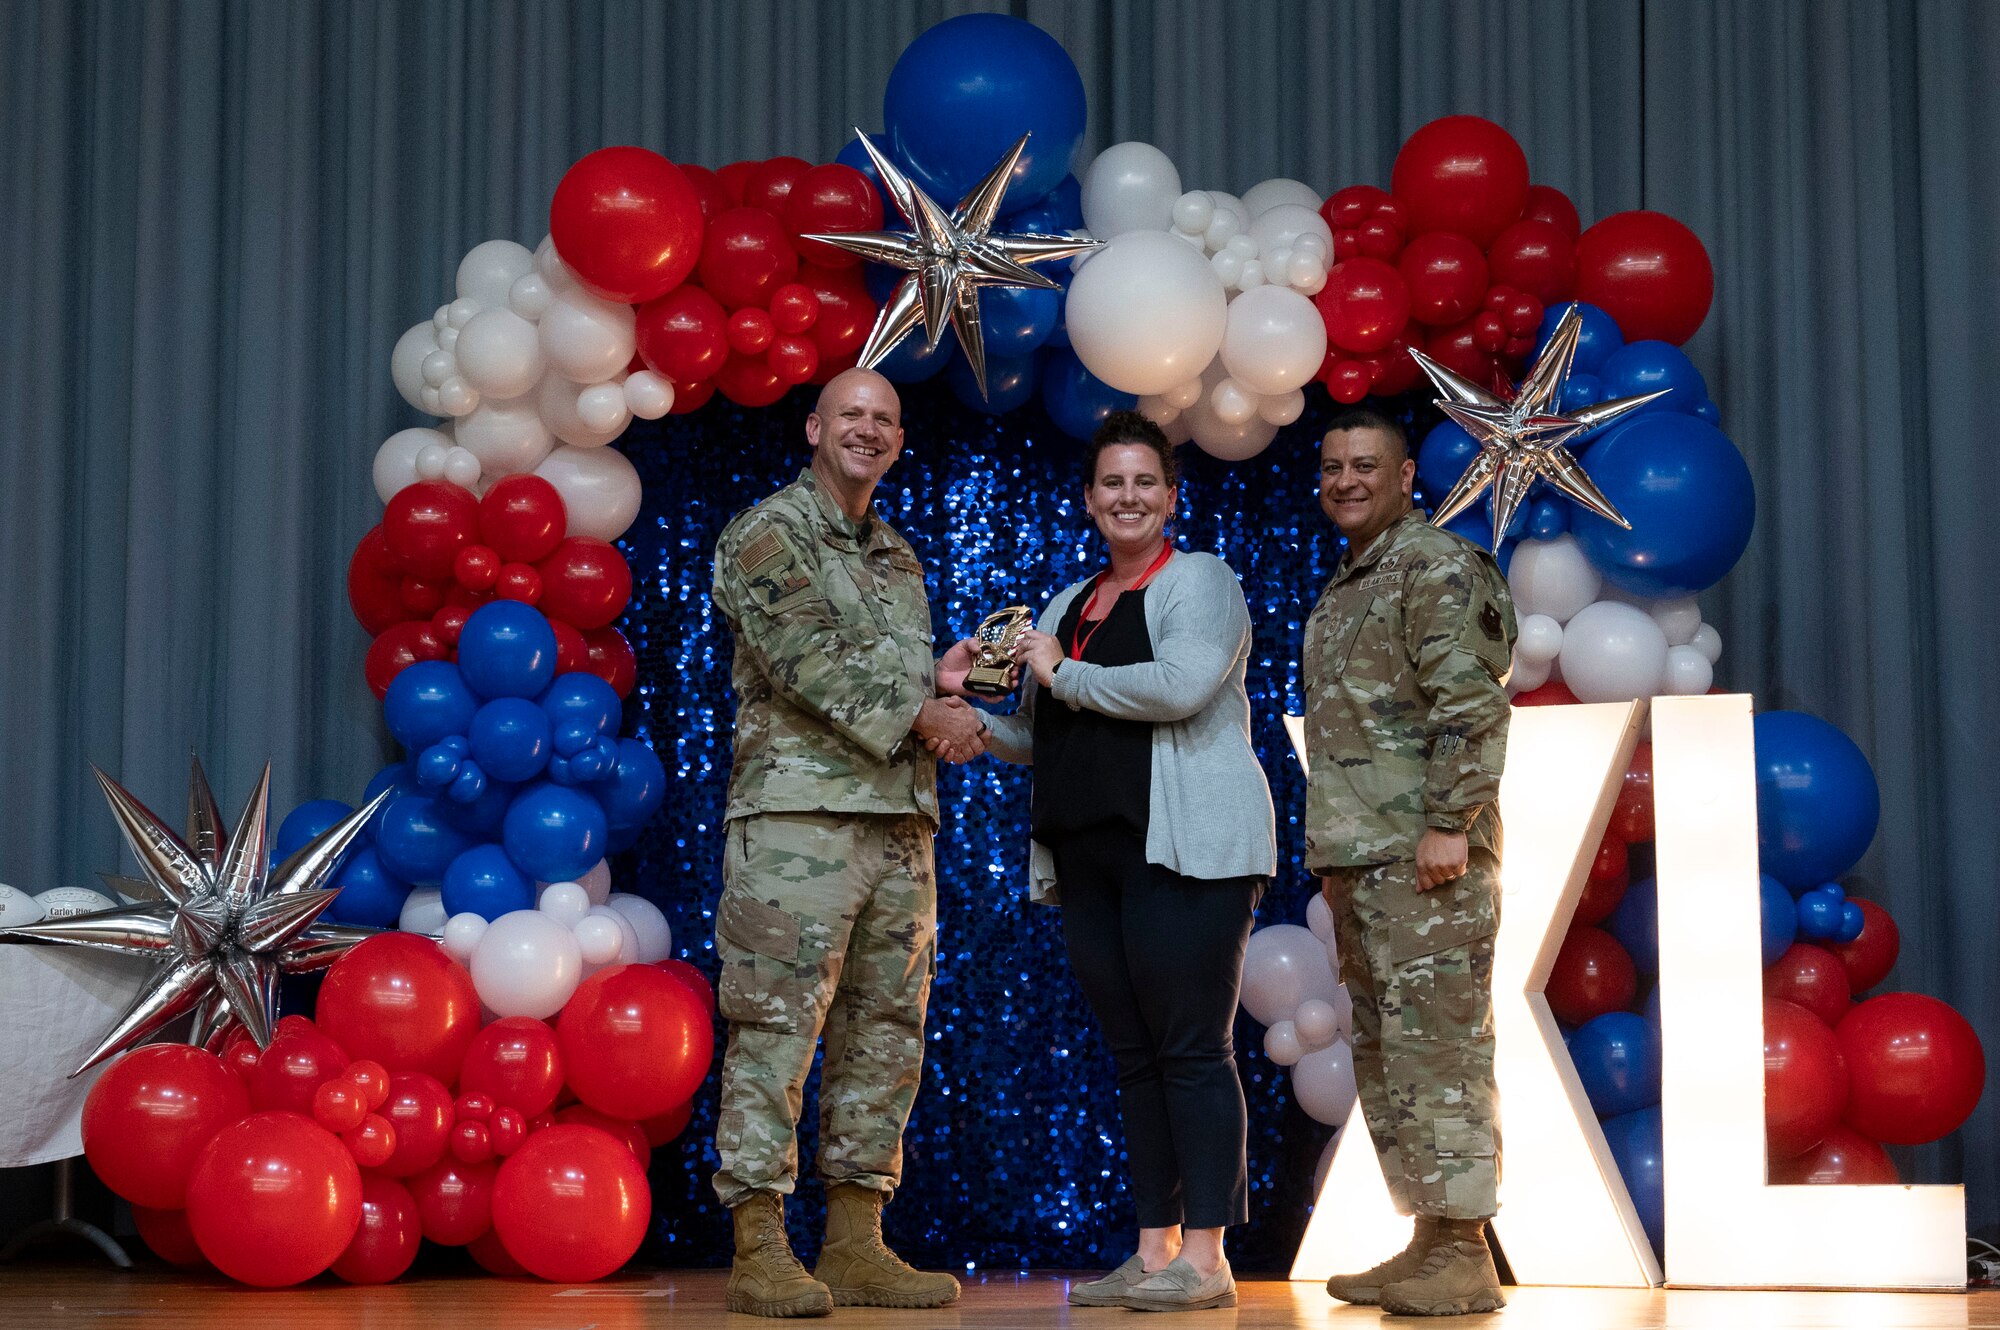 U.S. Air Force Col. Kevin Davidson, 47th Flying Training Wing (FTW) commander, and Chief Master Sgt. Lester Largaespada, 47th FTW command chief, present Laura Meyer-Frerich, 47th Mission Support Group, an award during the 2023 47th FTW Annual Awards Ceremony at Laughlin Air Force Base, Texas, Feb. 2, 2024. The annual awards recognized the top performers throughout the 47th Flying Training Wing during fiscal year 2023. (U.S. Air Force photo by Senior Airman Kailee Reynolds)